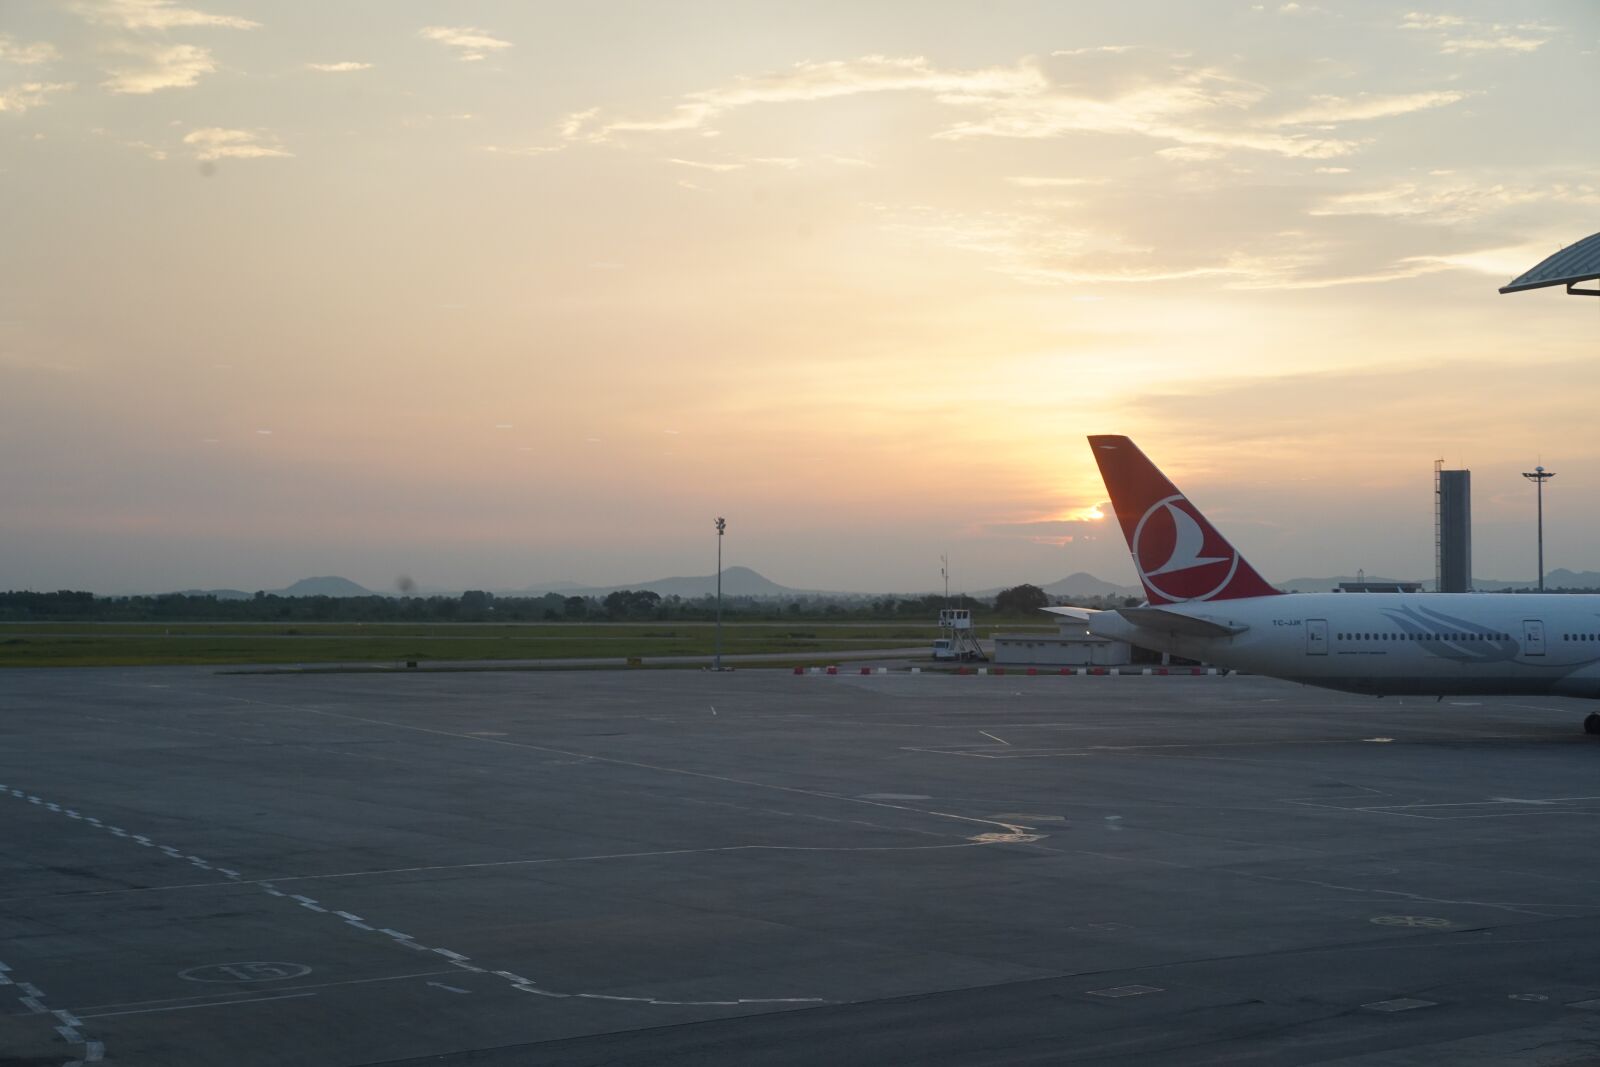 Sony a7 III + Sony Sonnar T* FE 55mm F1.8 ZA sample photo. Airport, airplane, sunset photography